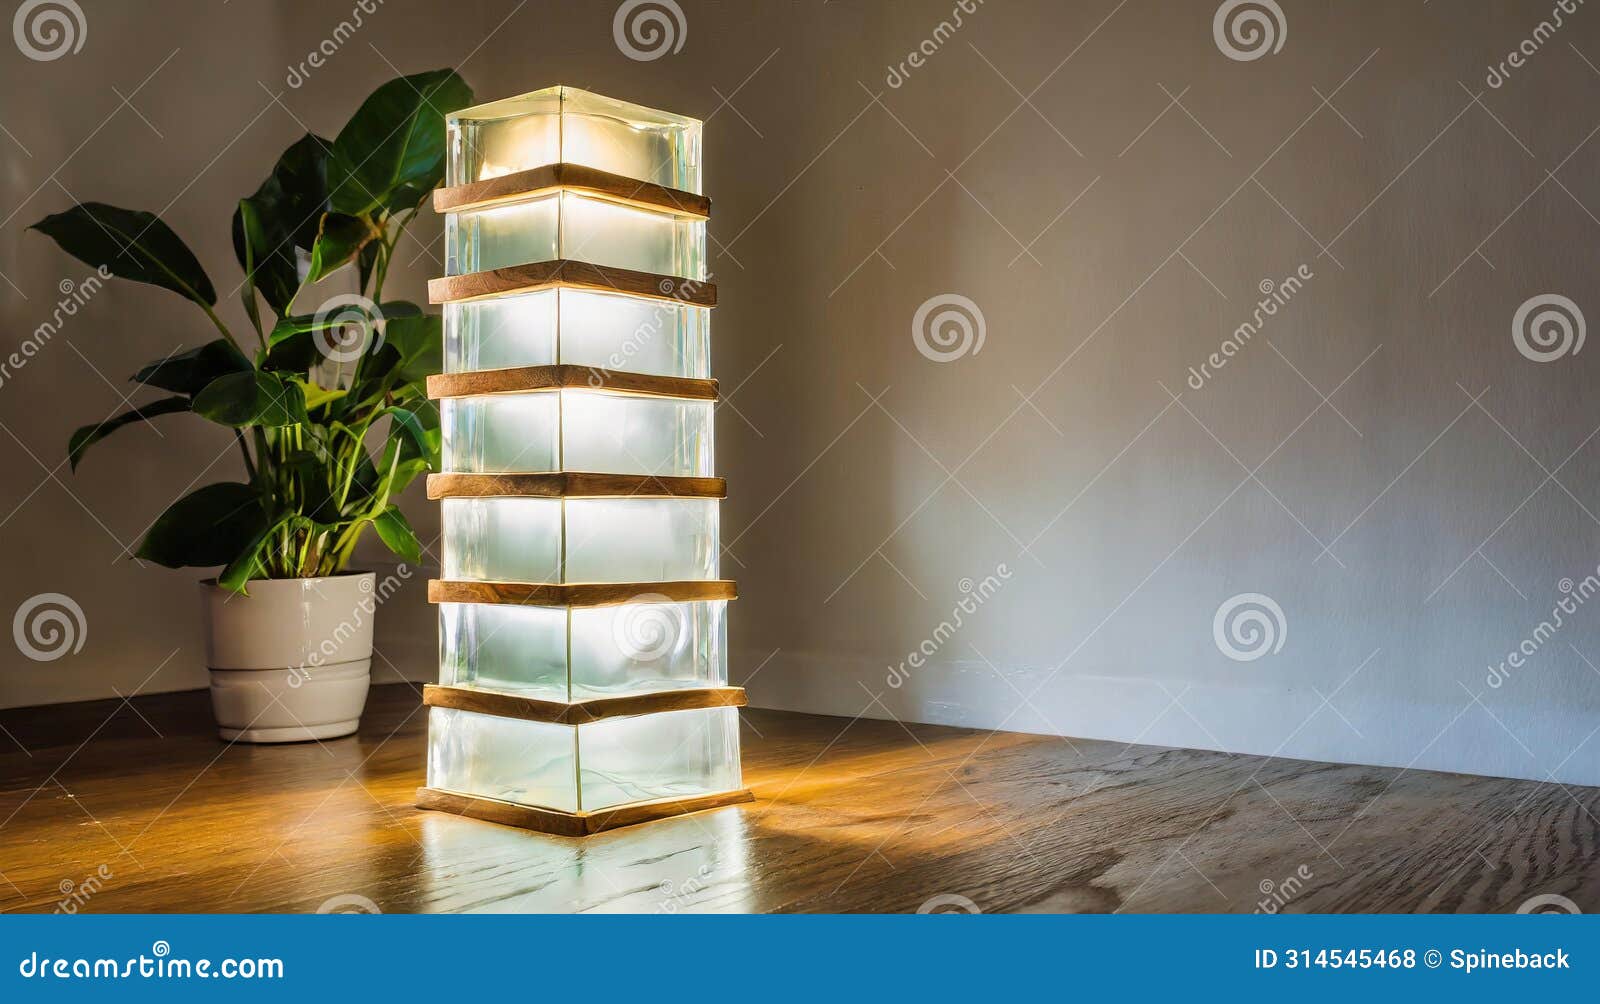 mid century style lucite glass stacked block floor lamp on wooden floor with potted plant in background corner, collectable light